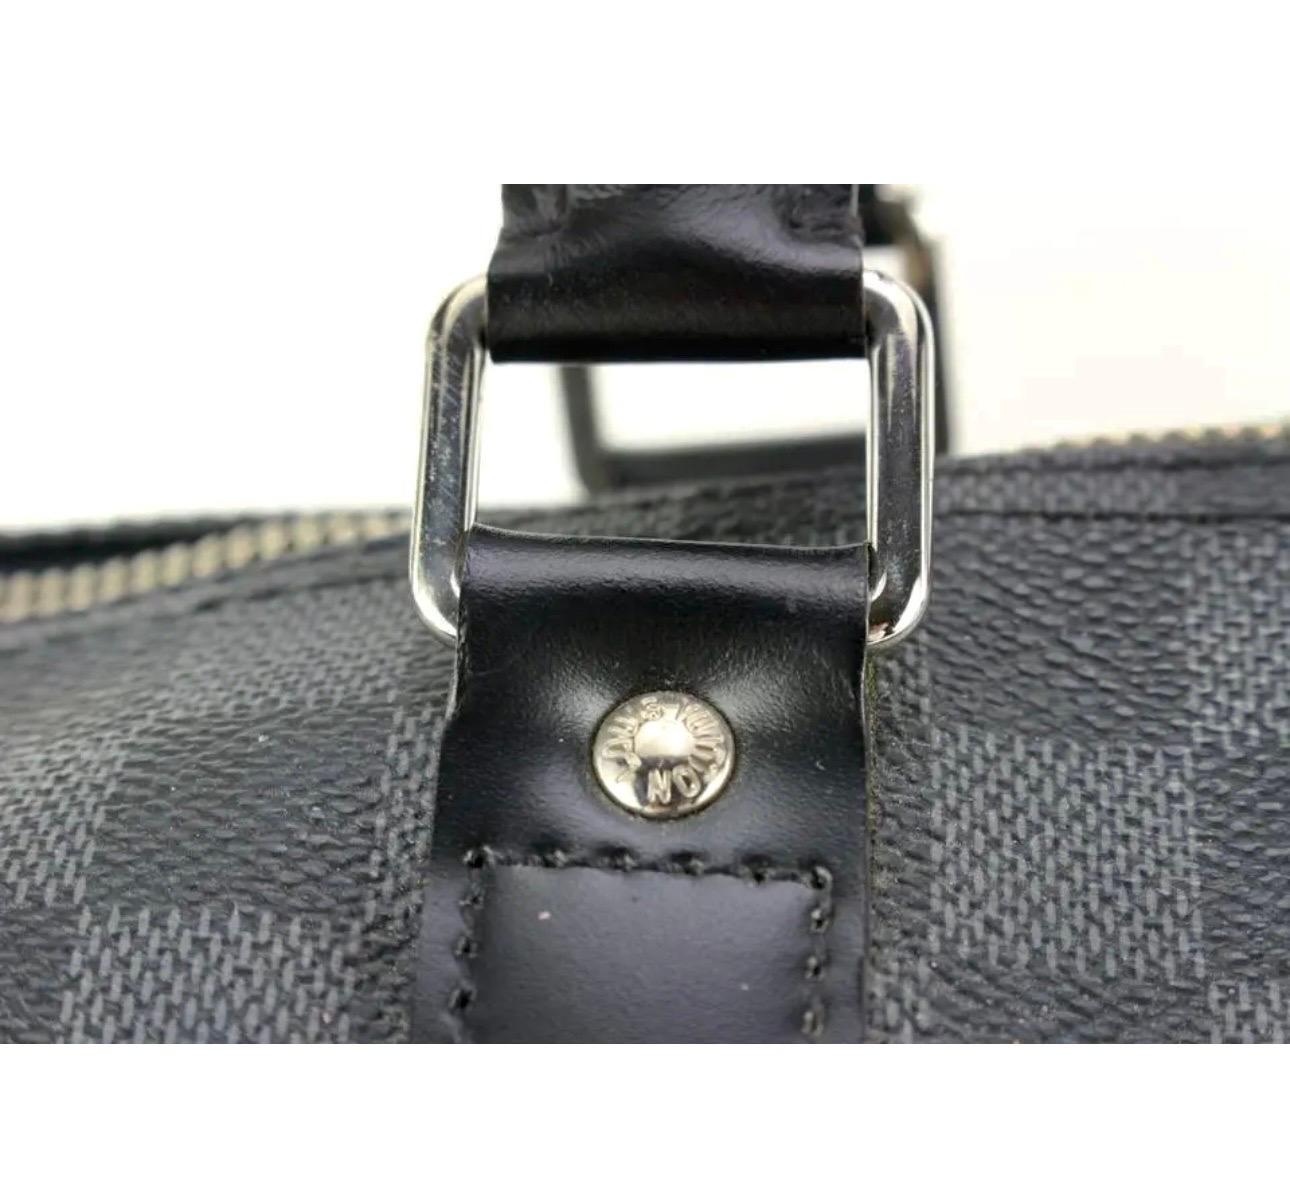 Louis Vuitton Boston Bag Keepall Bandouliere 55 Damier Graphite MB 2150 France In Excellent Condition For Sale In New York, NY